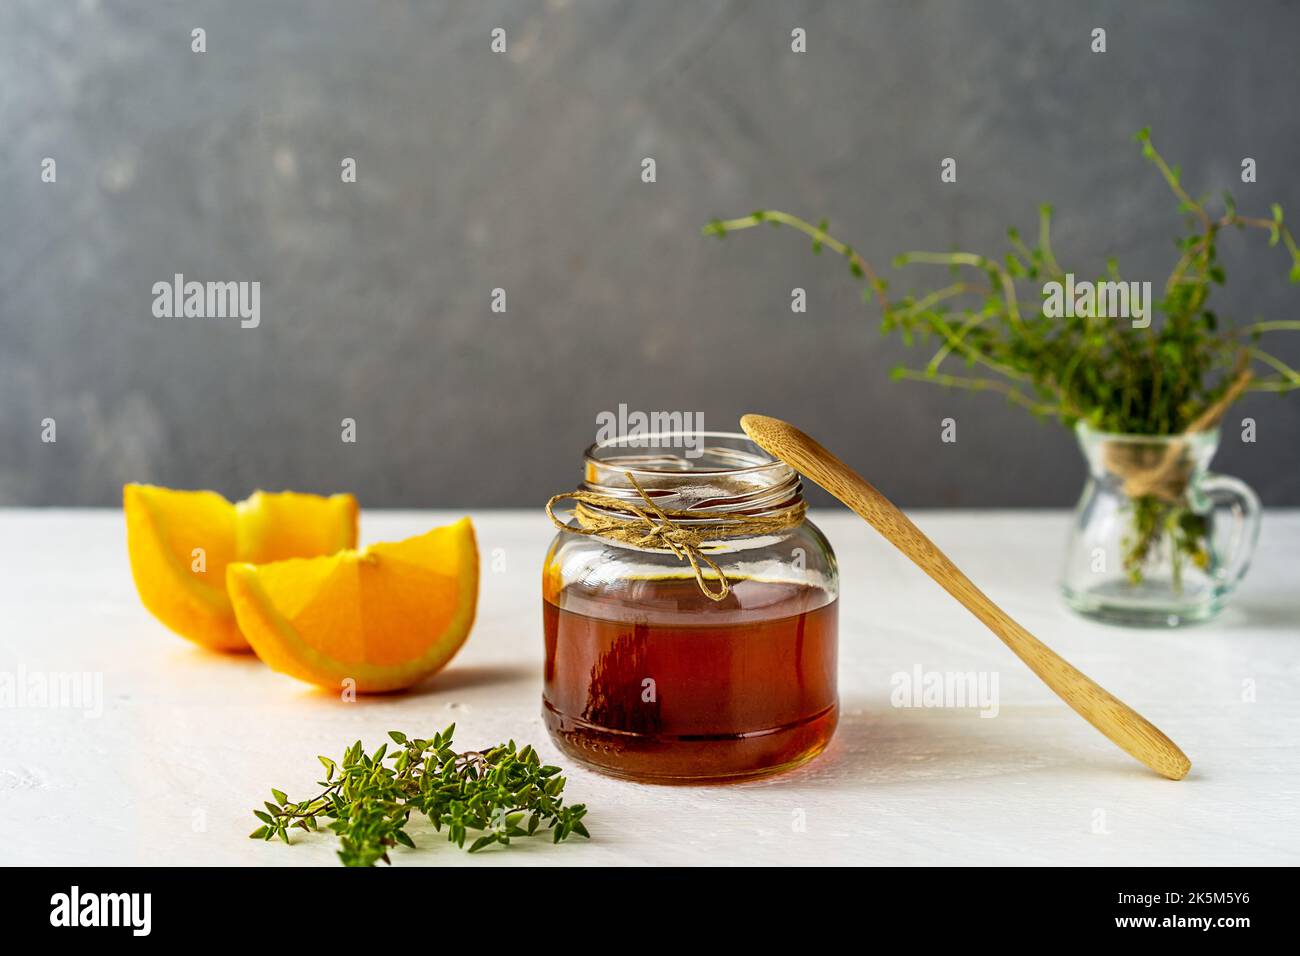 Thyme honey in small jar, wooden tea spoon, small thyme branch, orange slices on white table with grey background Stock Photo